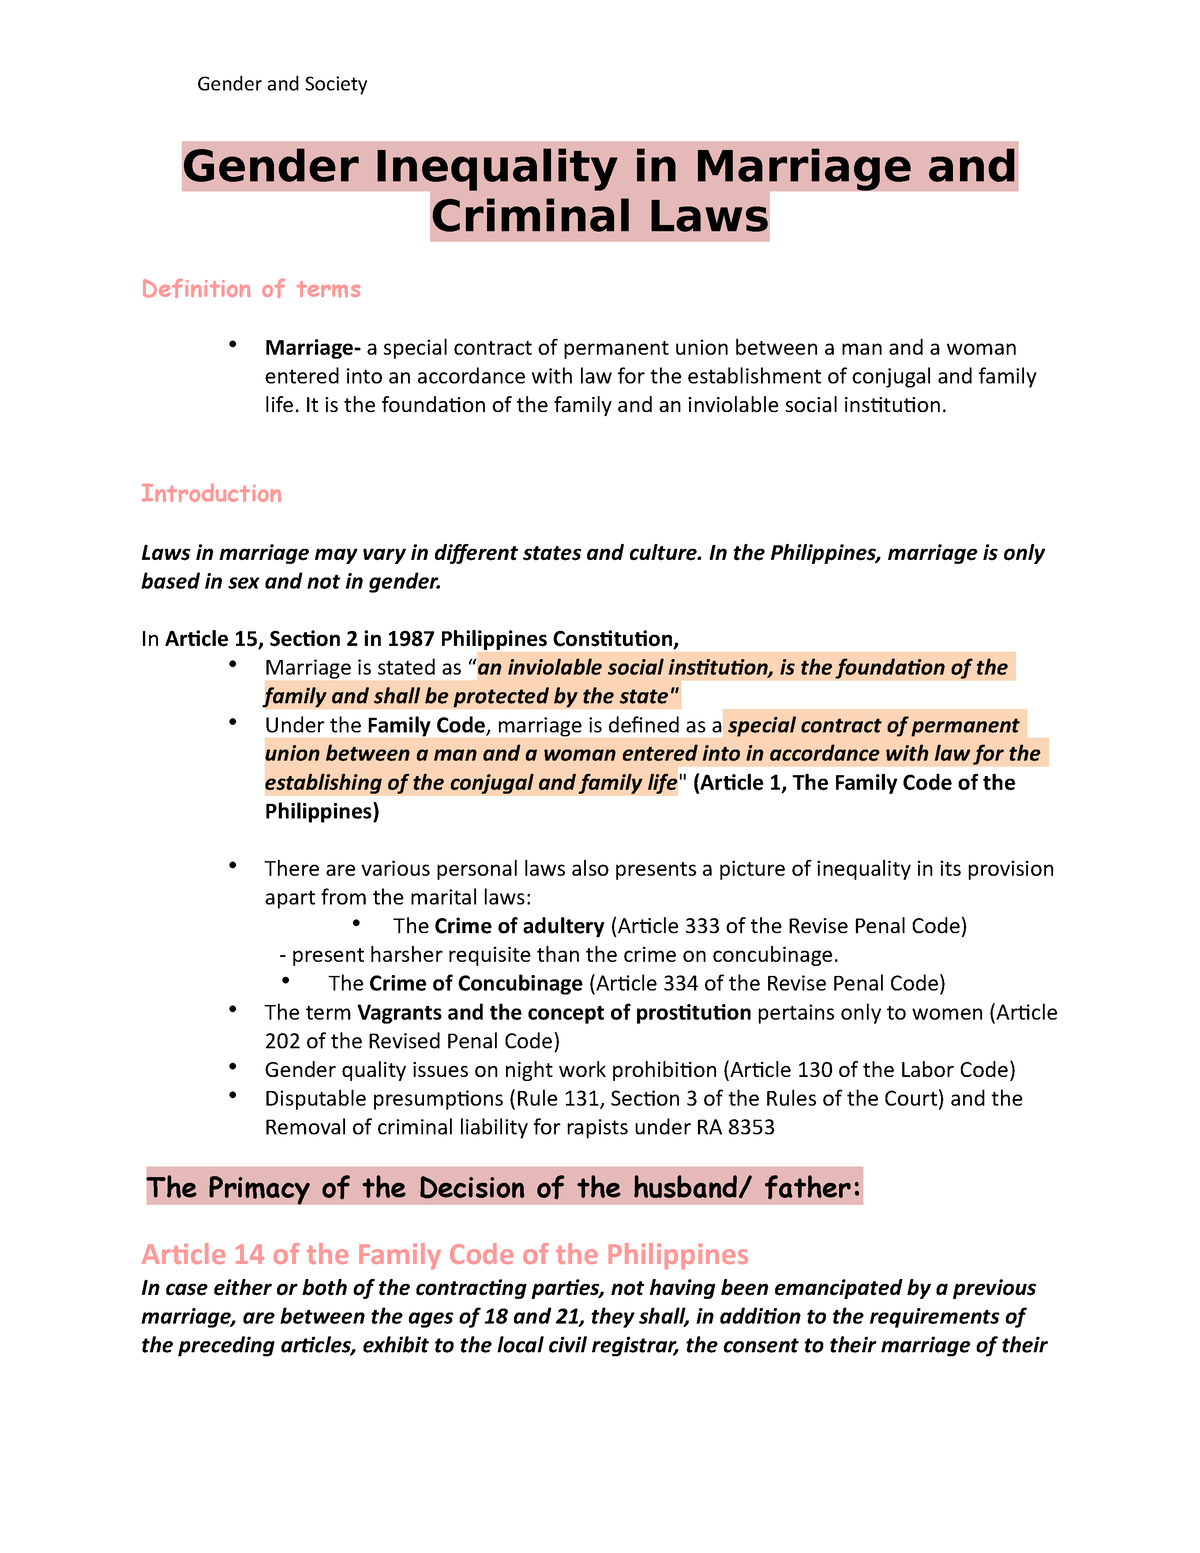 gender inequality in marriage and criminal laws essay